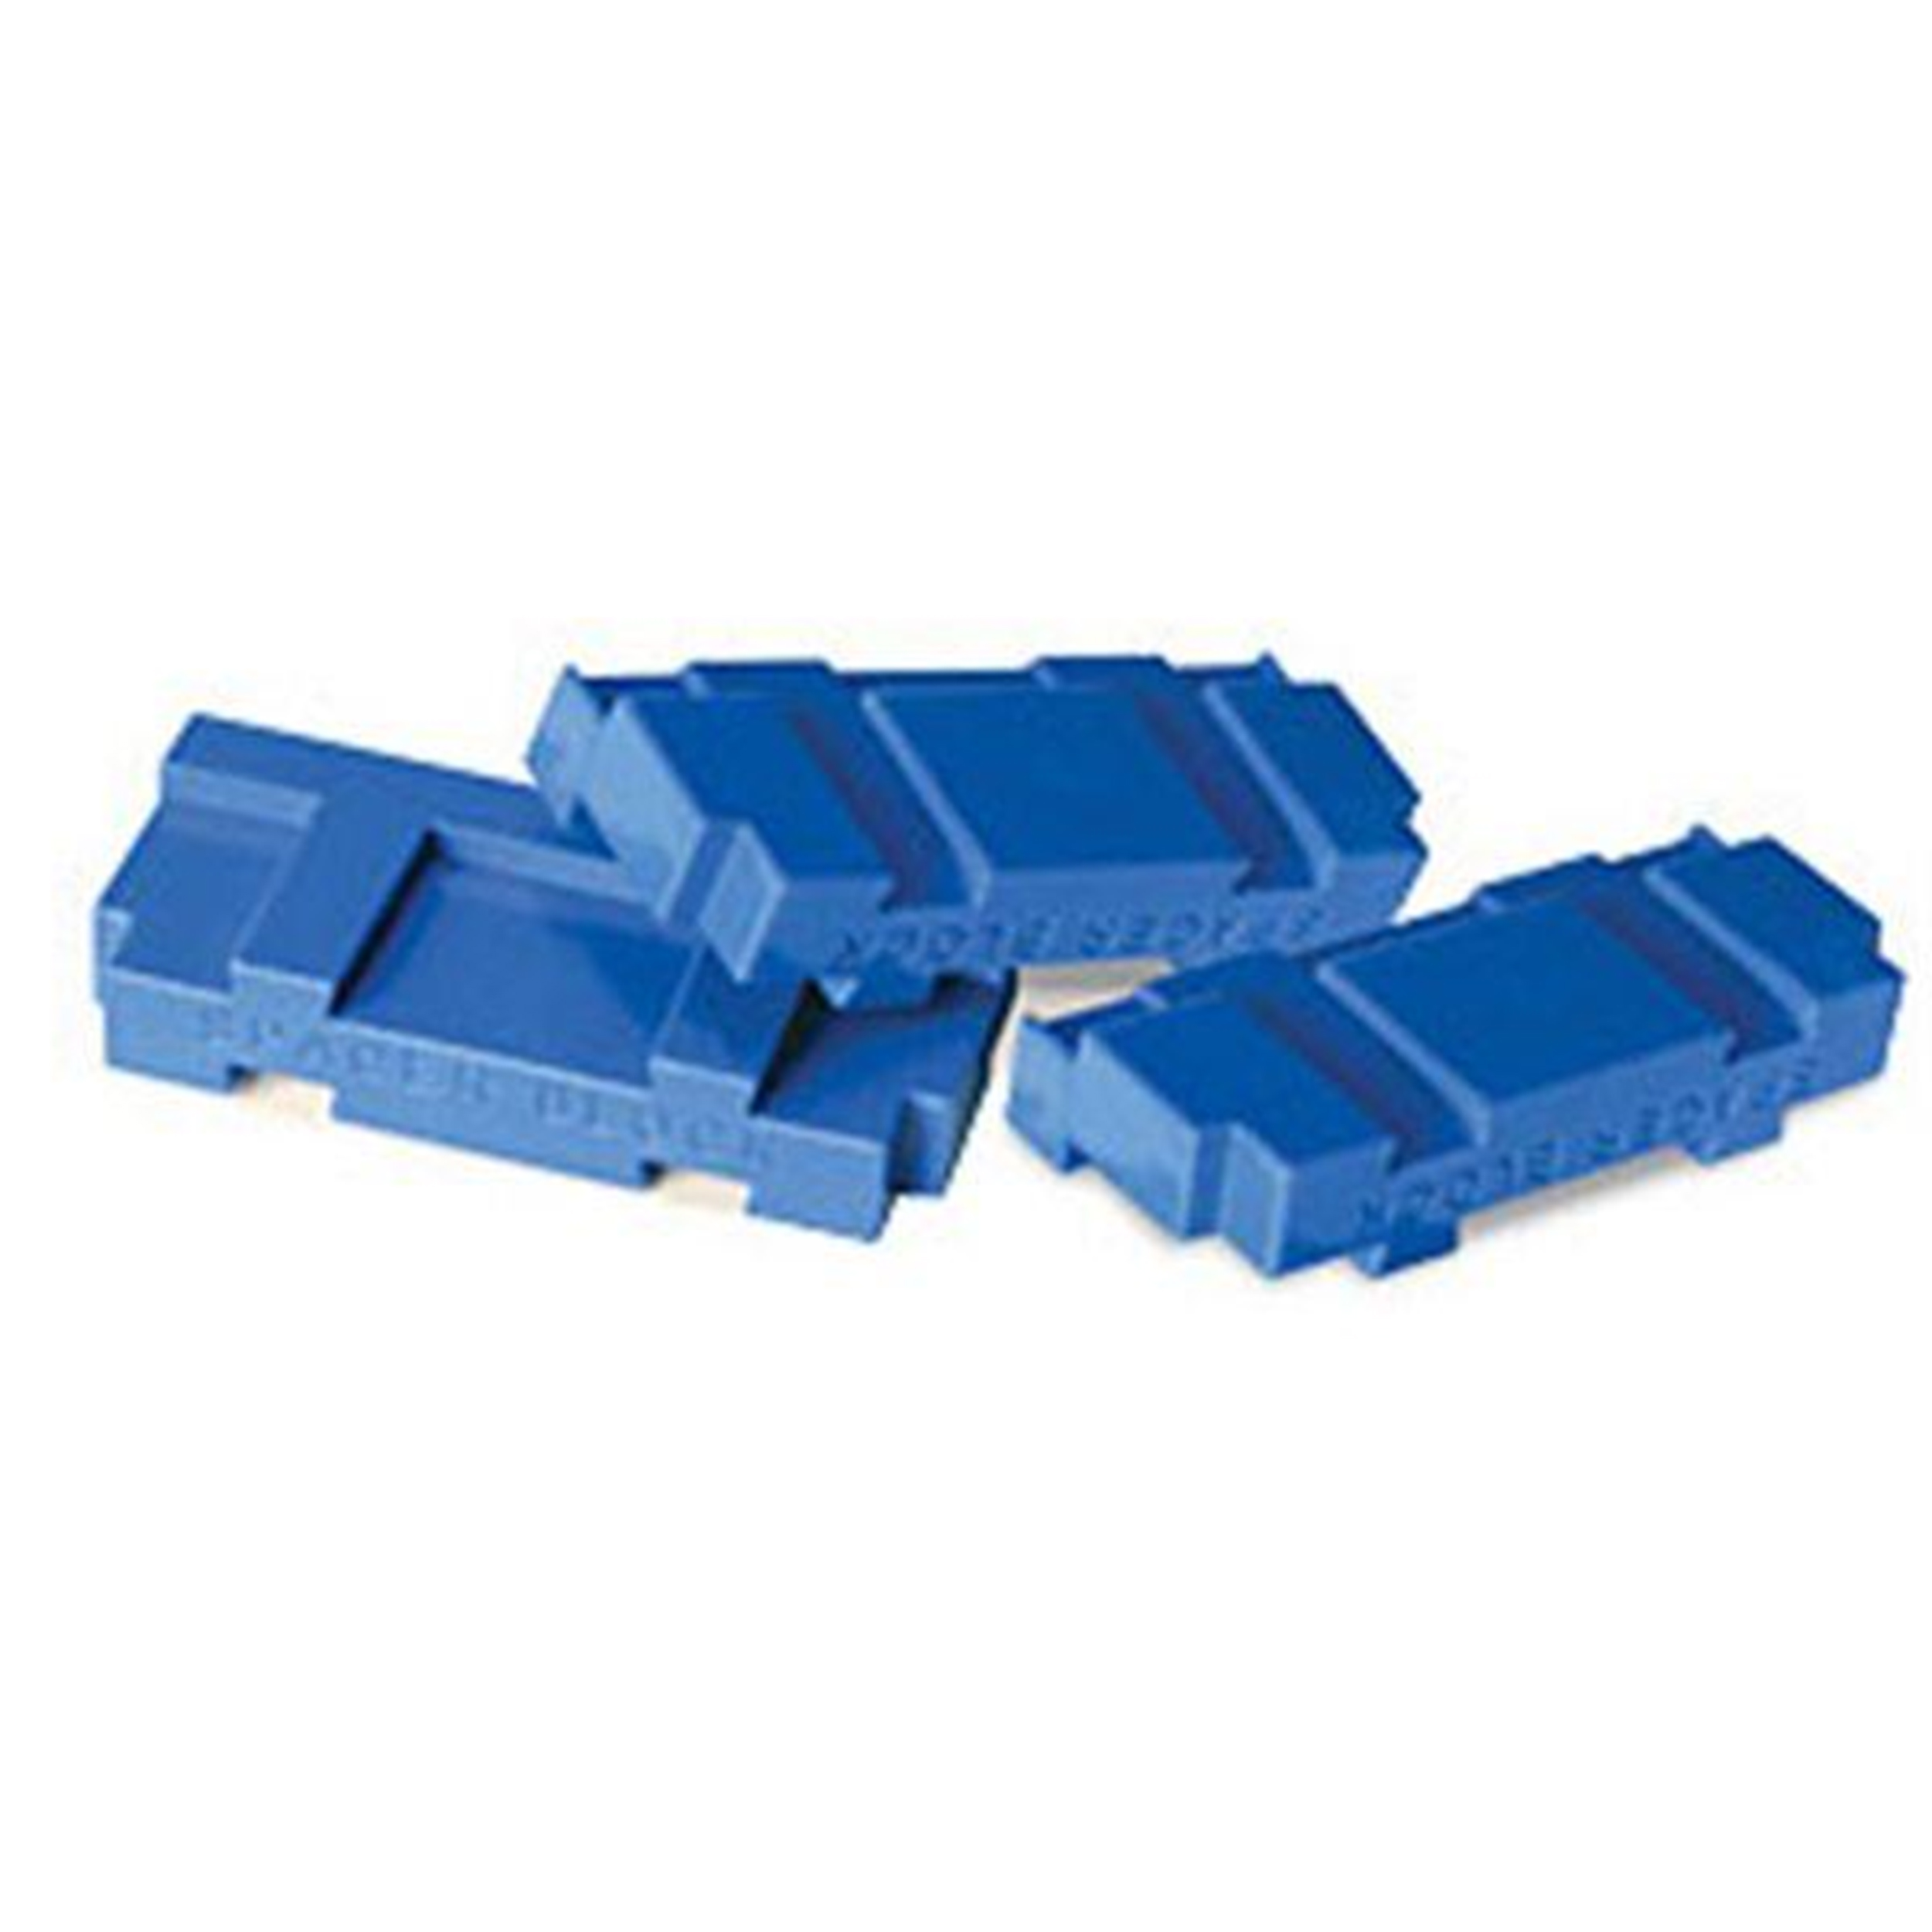 Kreg Jig 3-pieces Drill Guide Spacers K3 K4 And K5 #kdgadapt